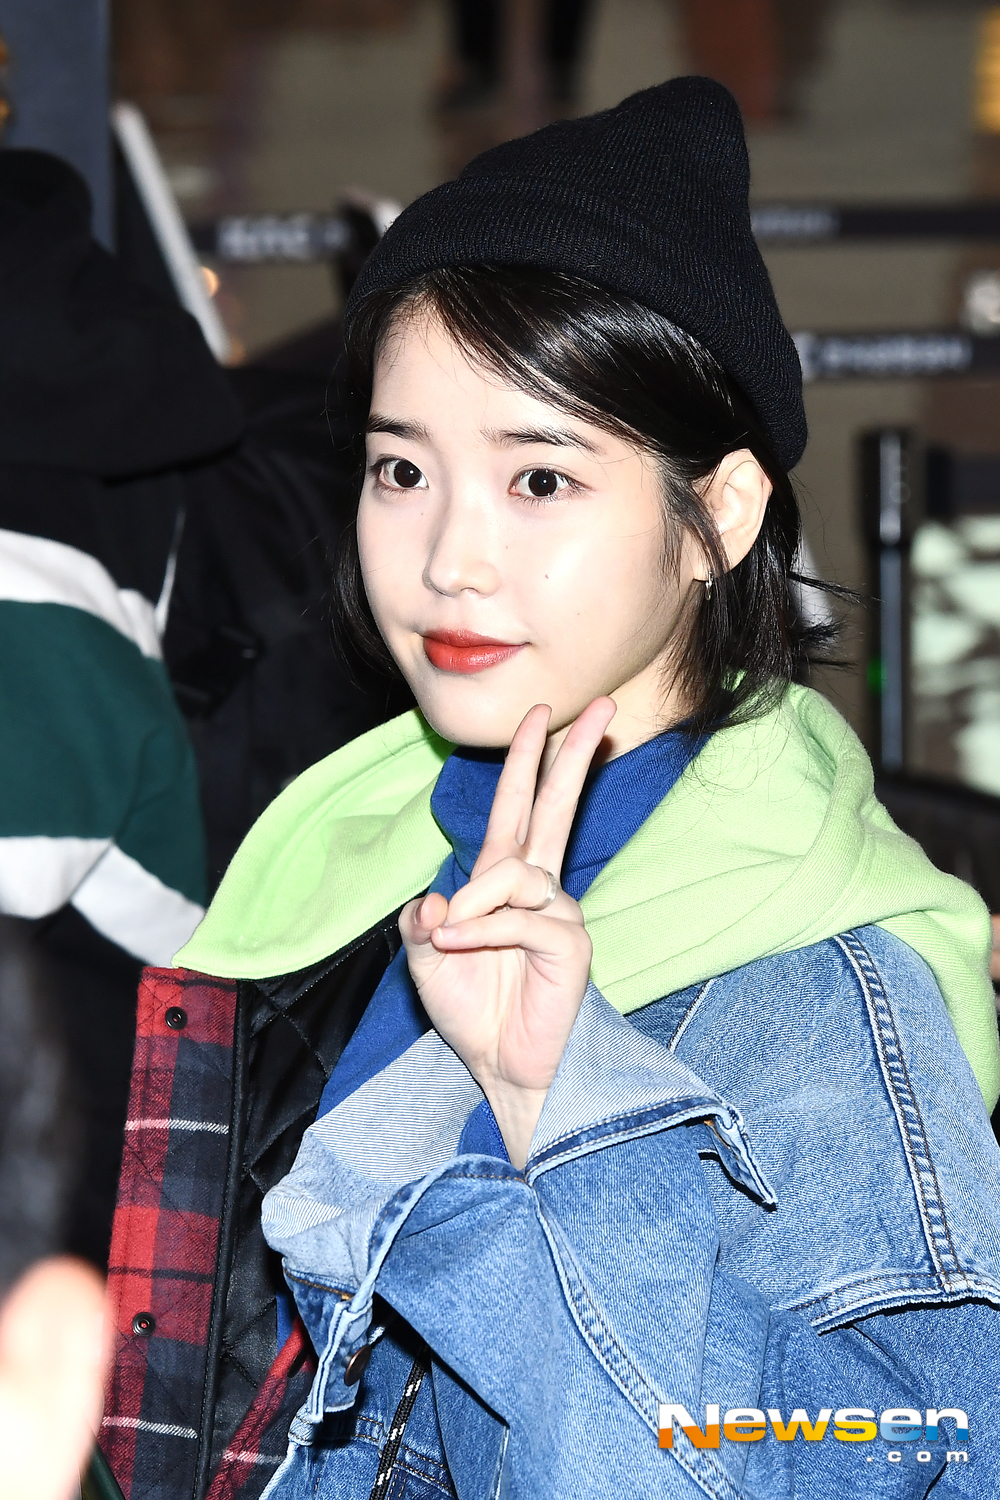 Actor and Singer IU will be performing the 2018 IU 10th Anniversary Tour Concert on the domestic flight of Gimpo Airport in Banghwa-dong, Gangseo-gu, Seoul on the afternoon of January 4th.Actor and Singer IU is Departing The Jeju Island.exponential earthquake